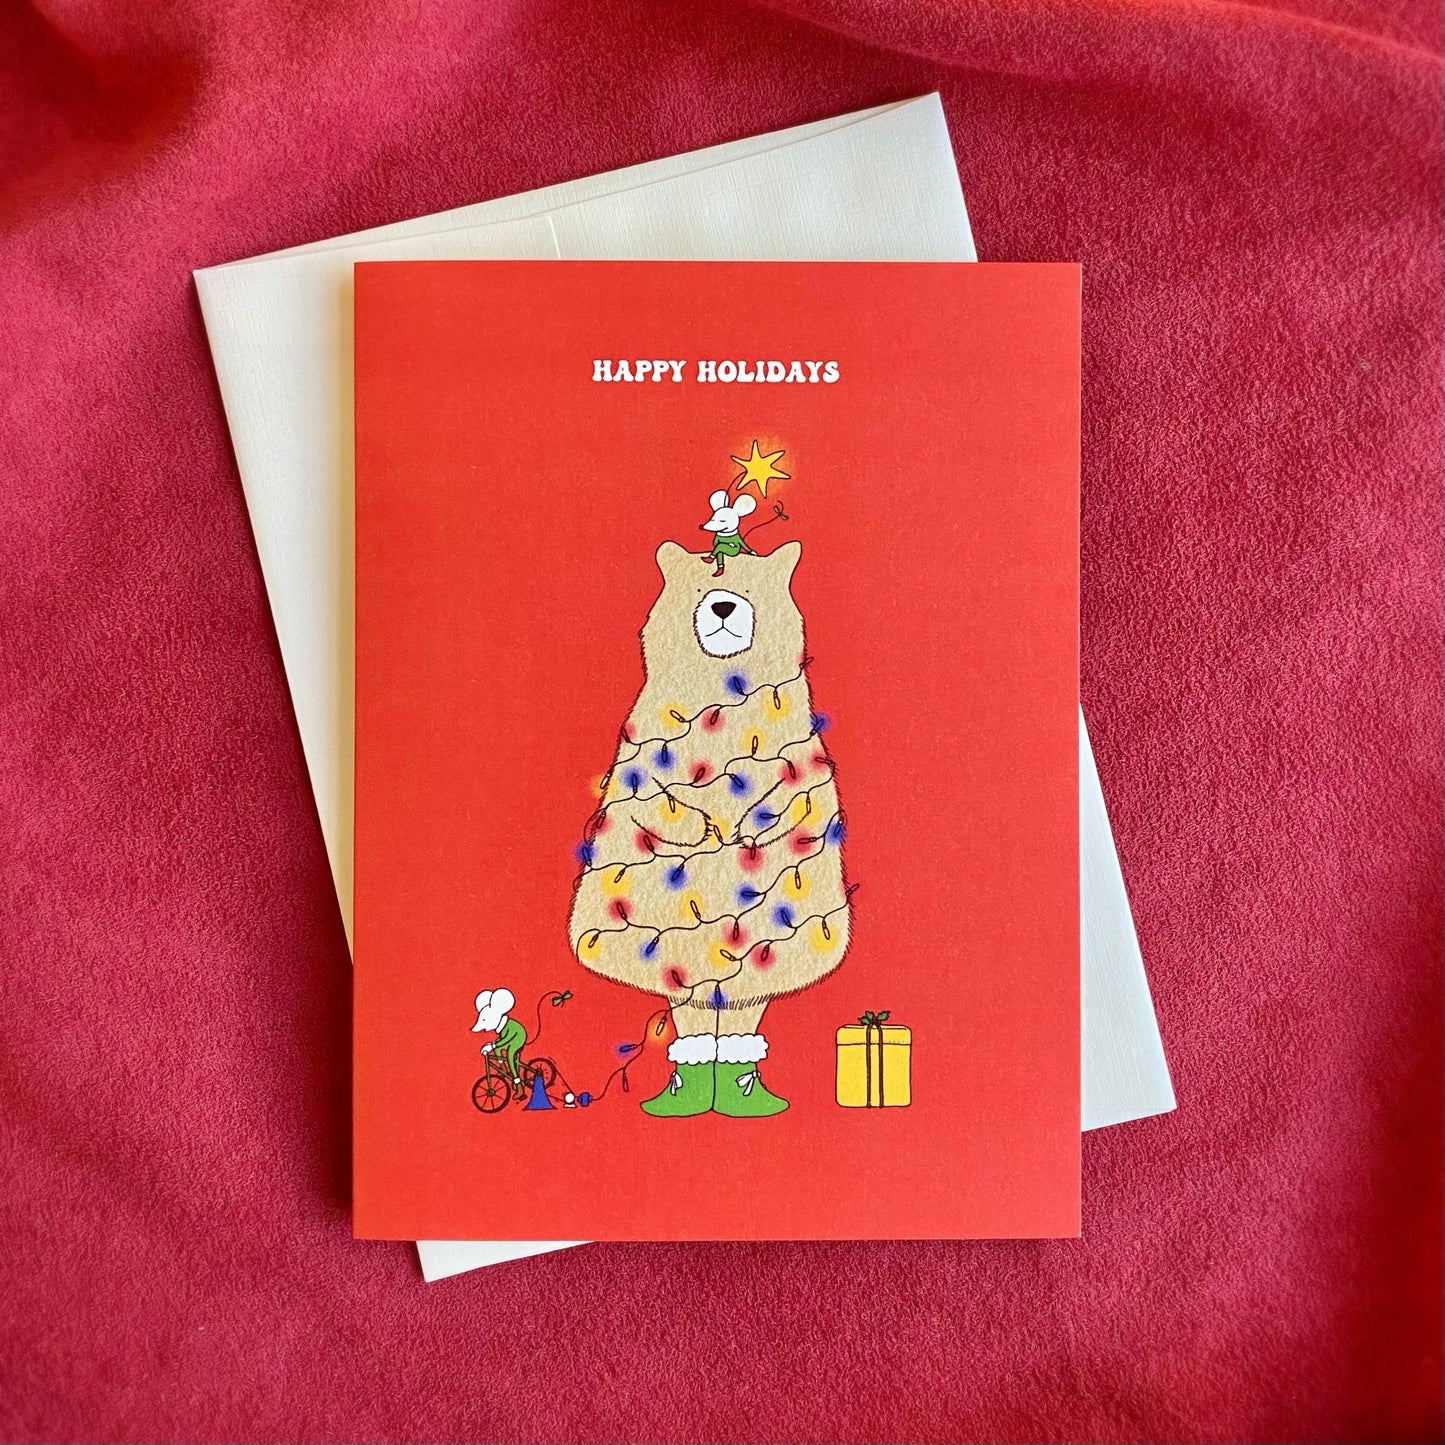 Cute Christmas Card with the text “not a creature was stirring, Merry Christmas” and the illustration of a bear as a Christmas tree and two mice on a red background